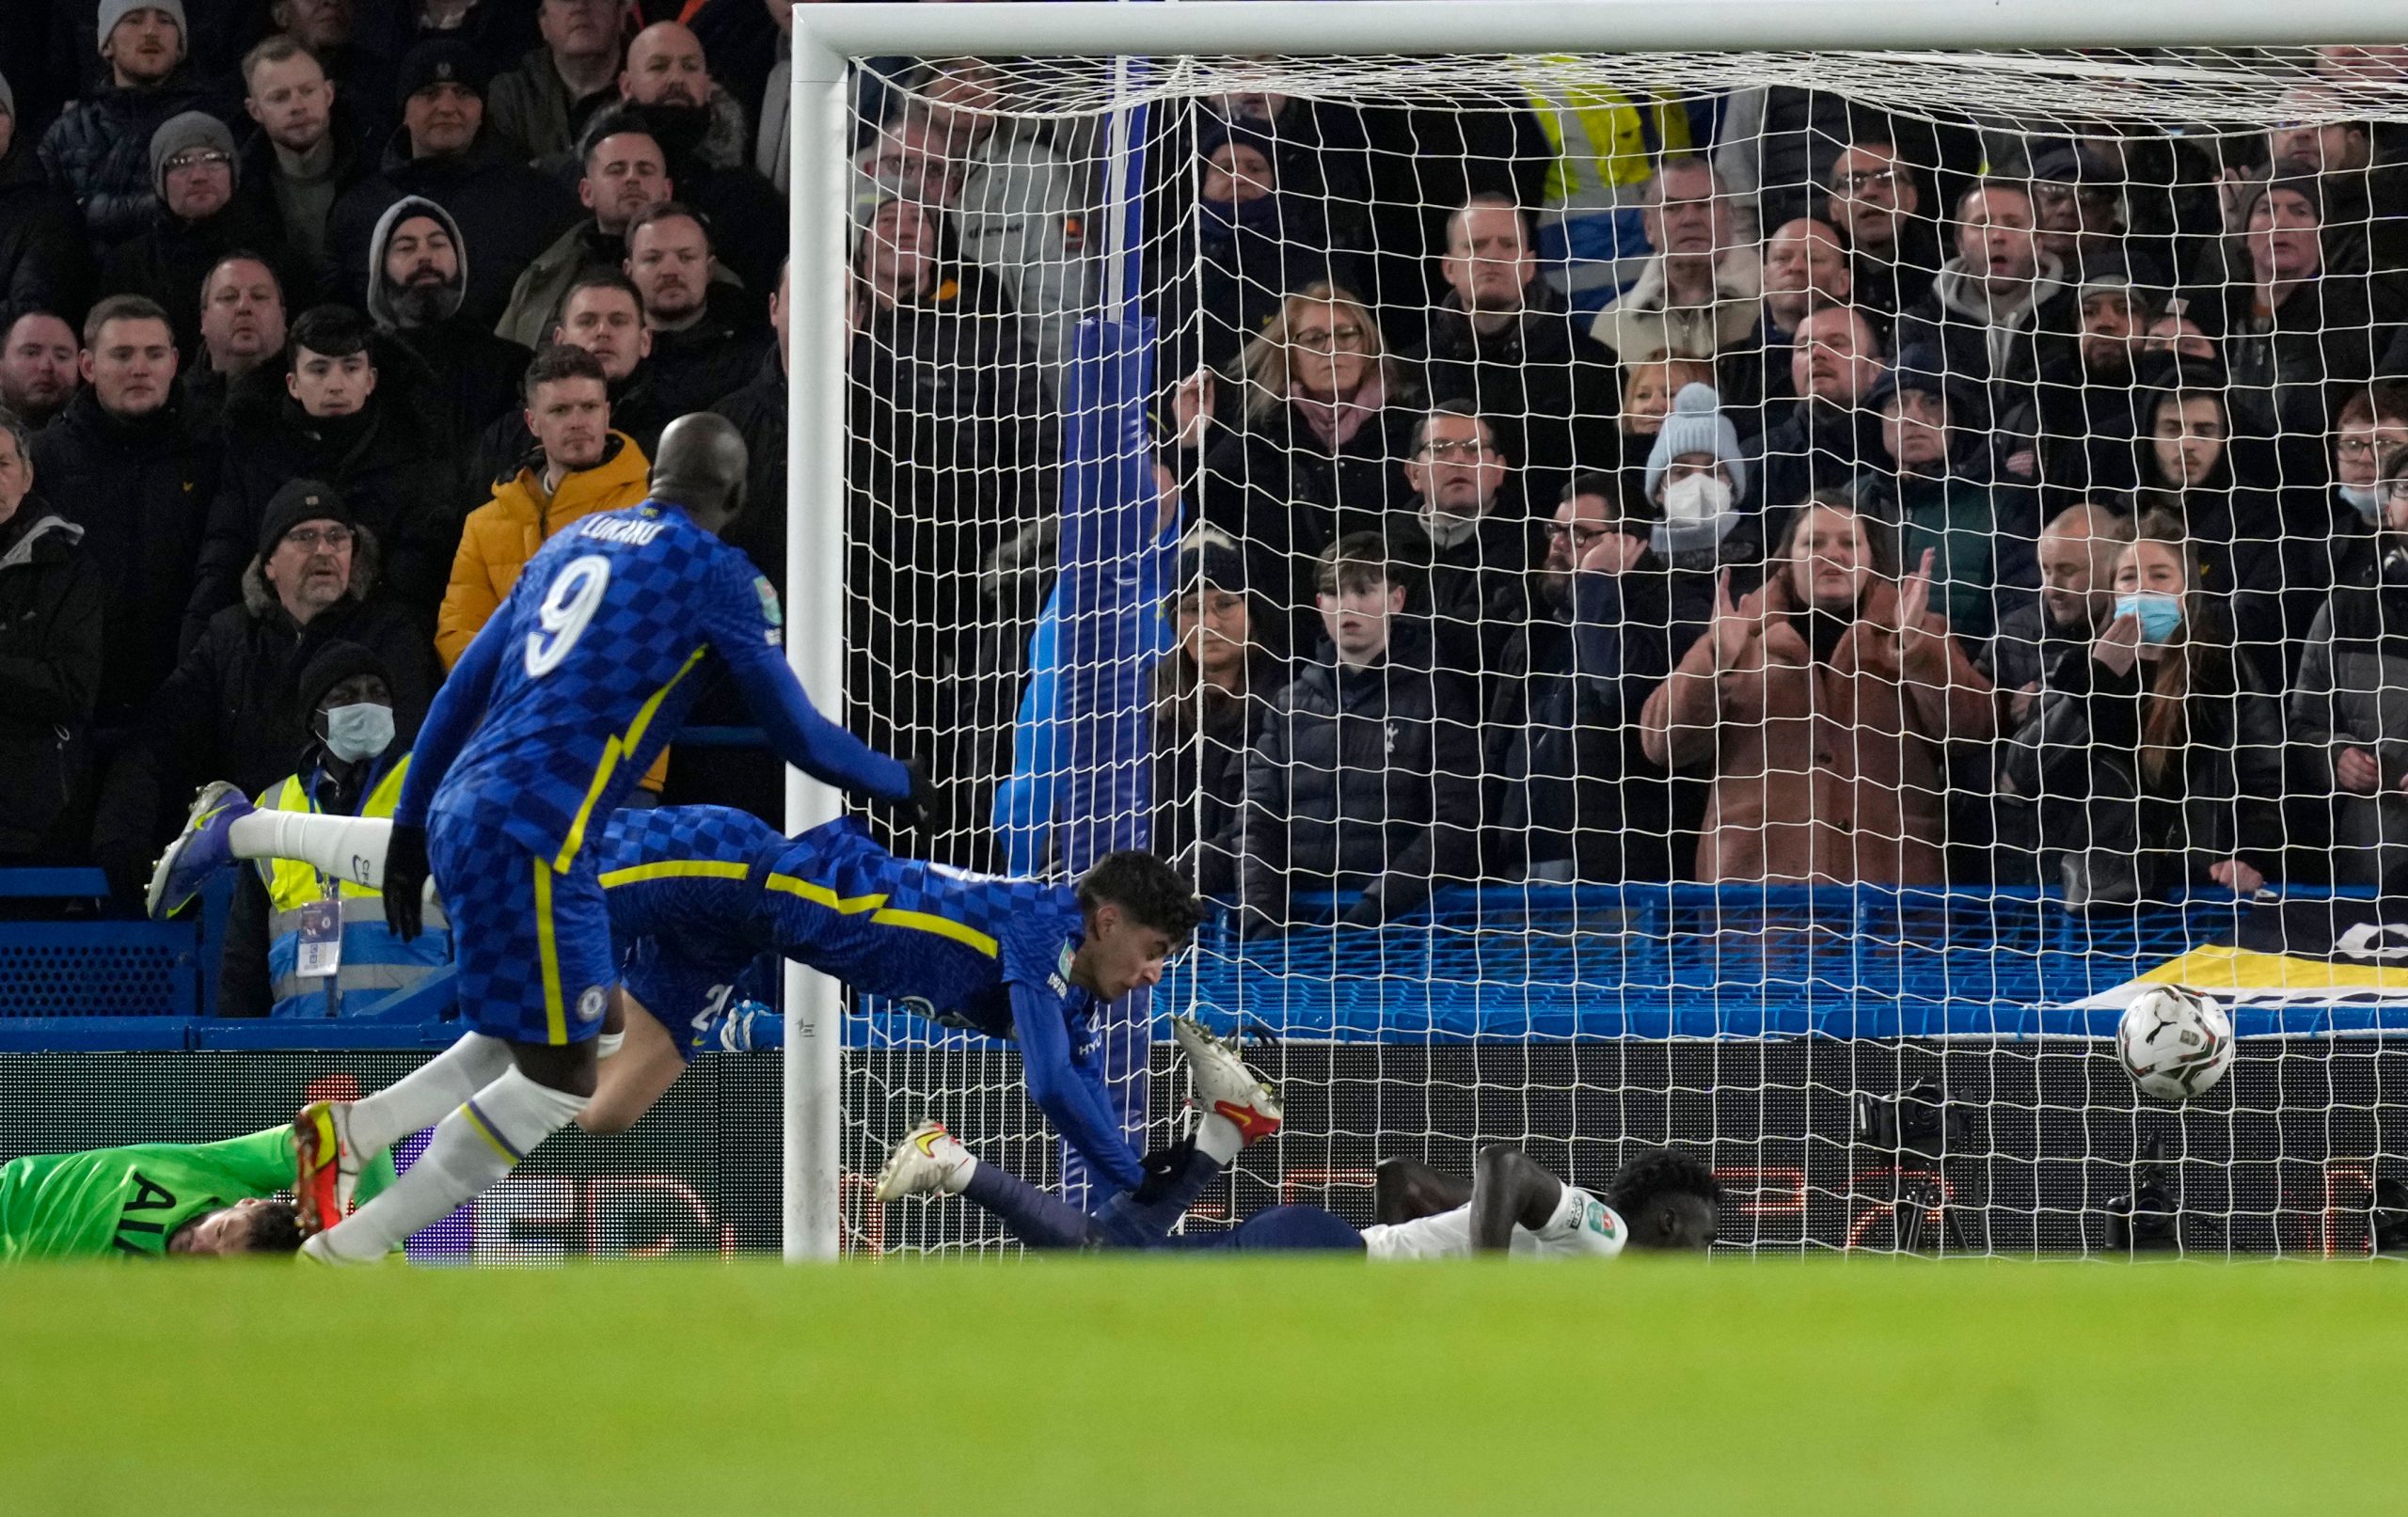 Chelsea gifted goals by Spurs to gain 2-0 cup semifinal lead